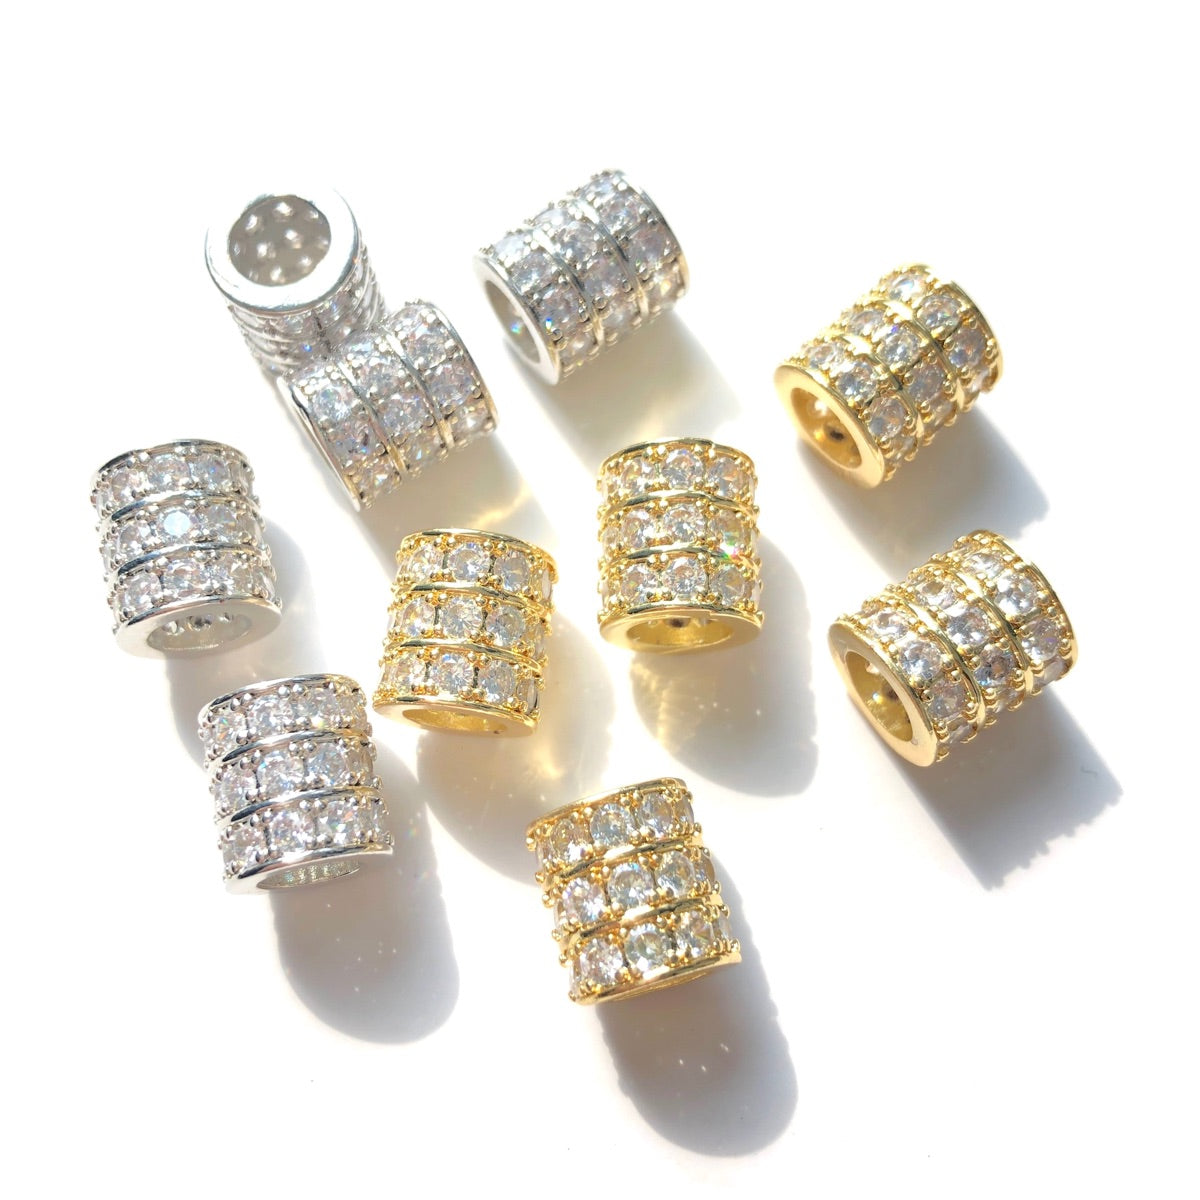 10 Grams (About 15pc) 8x3mm Faceted Rondelle Spacer Beads, Gold